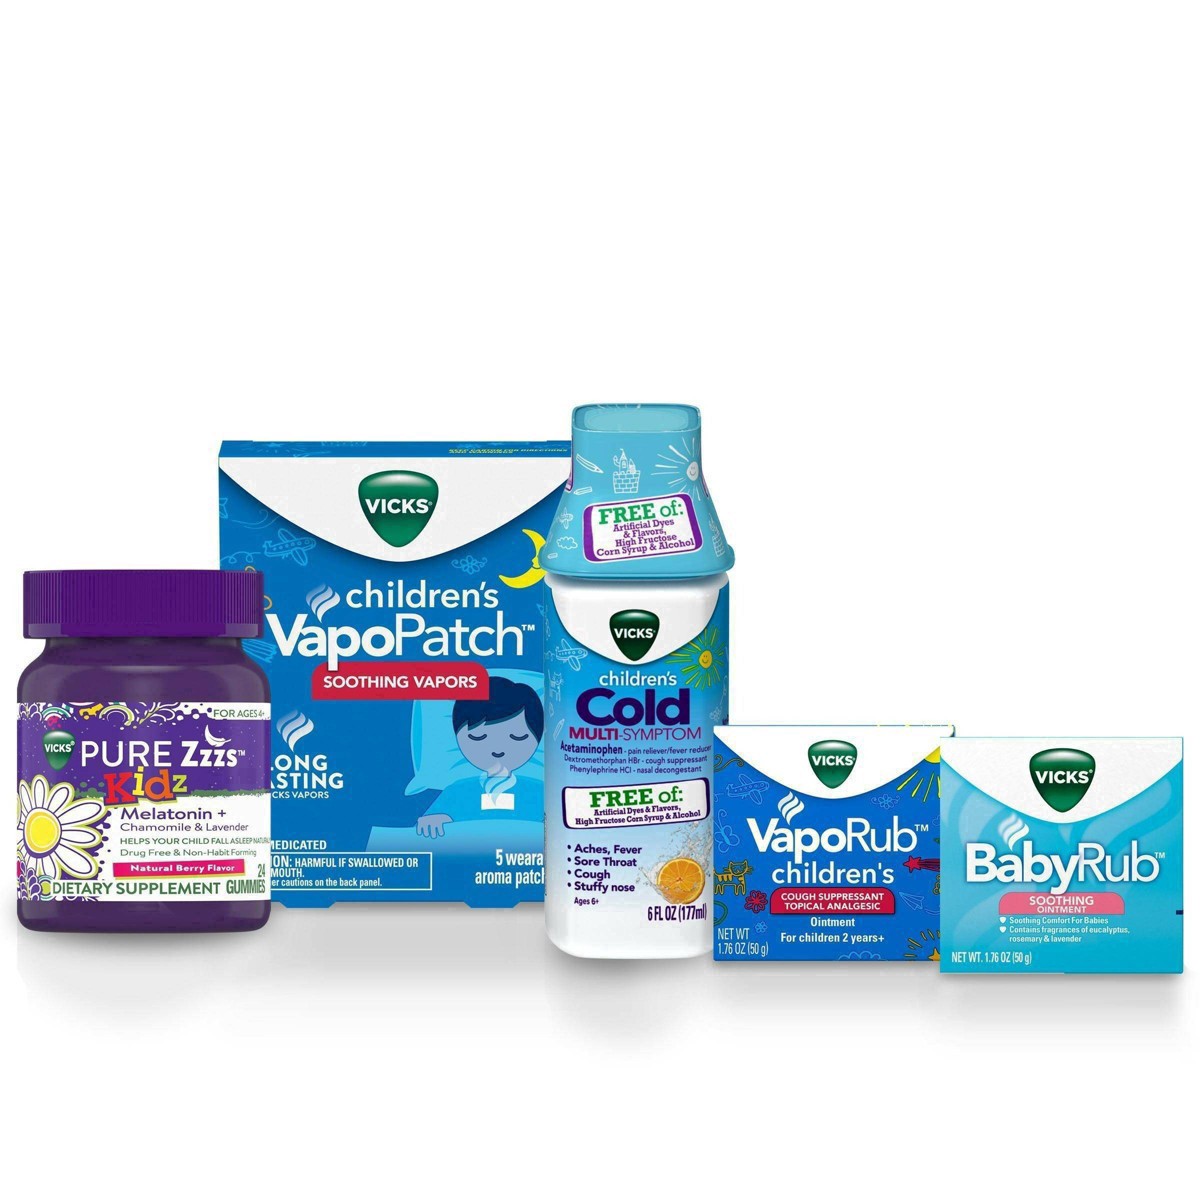 slide 13 of 37, Vicks Children's VapoPatch with Long Lasting Soothing Vapors - Menthol - 5ct, 5 ct